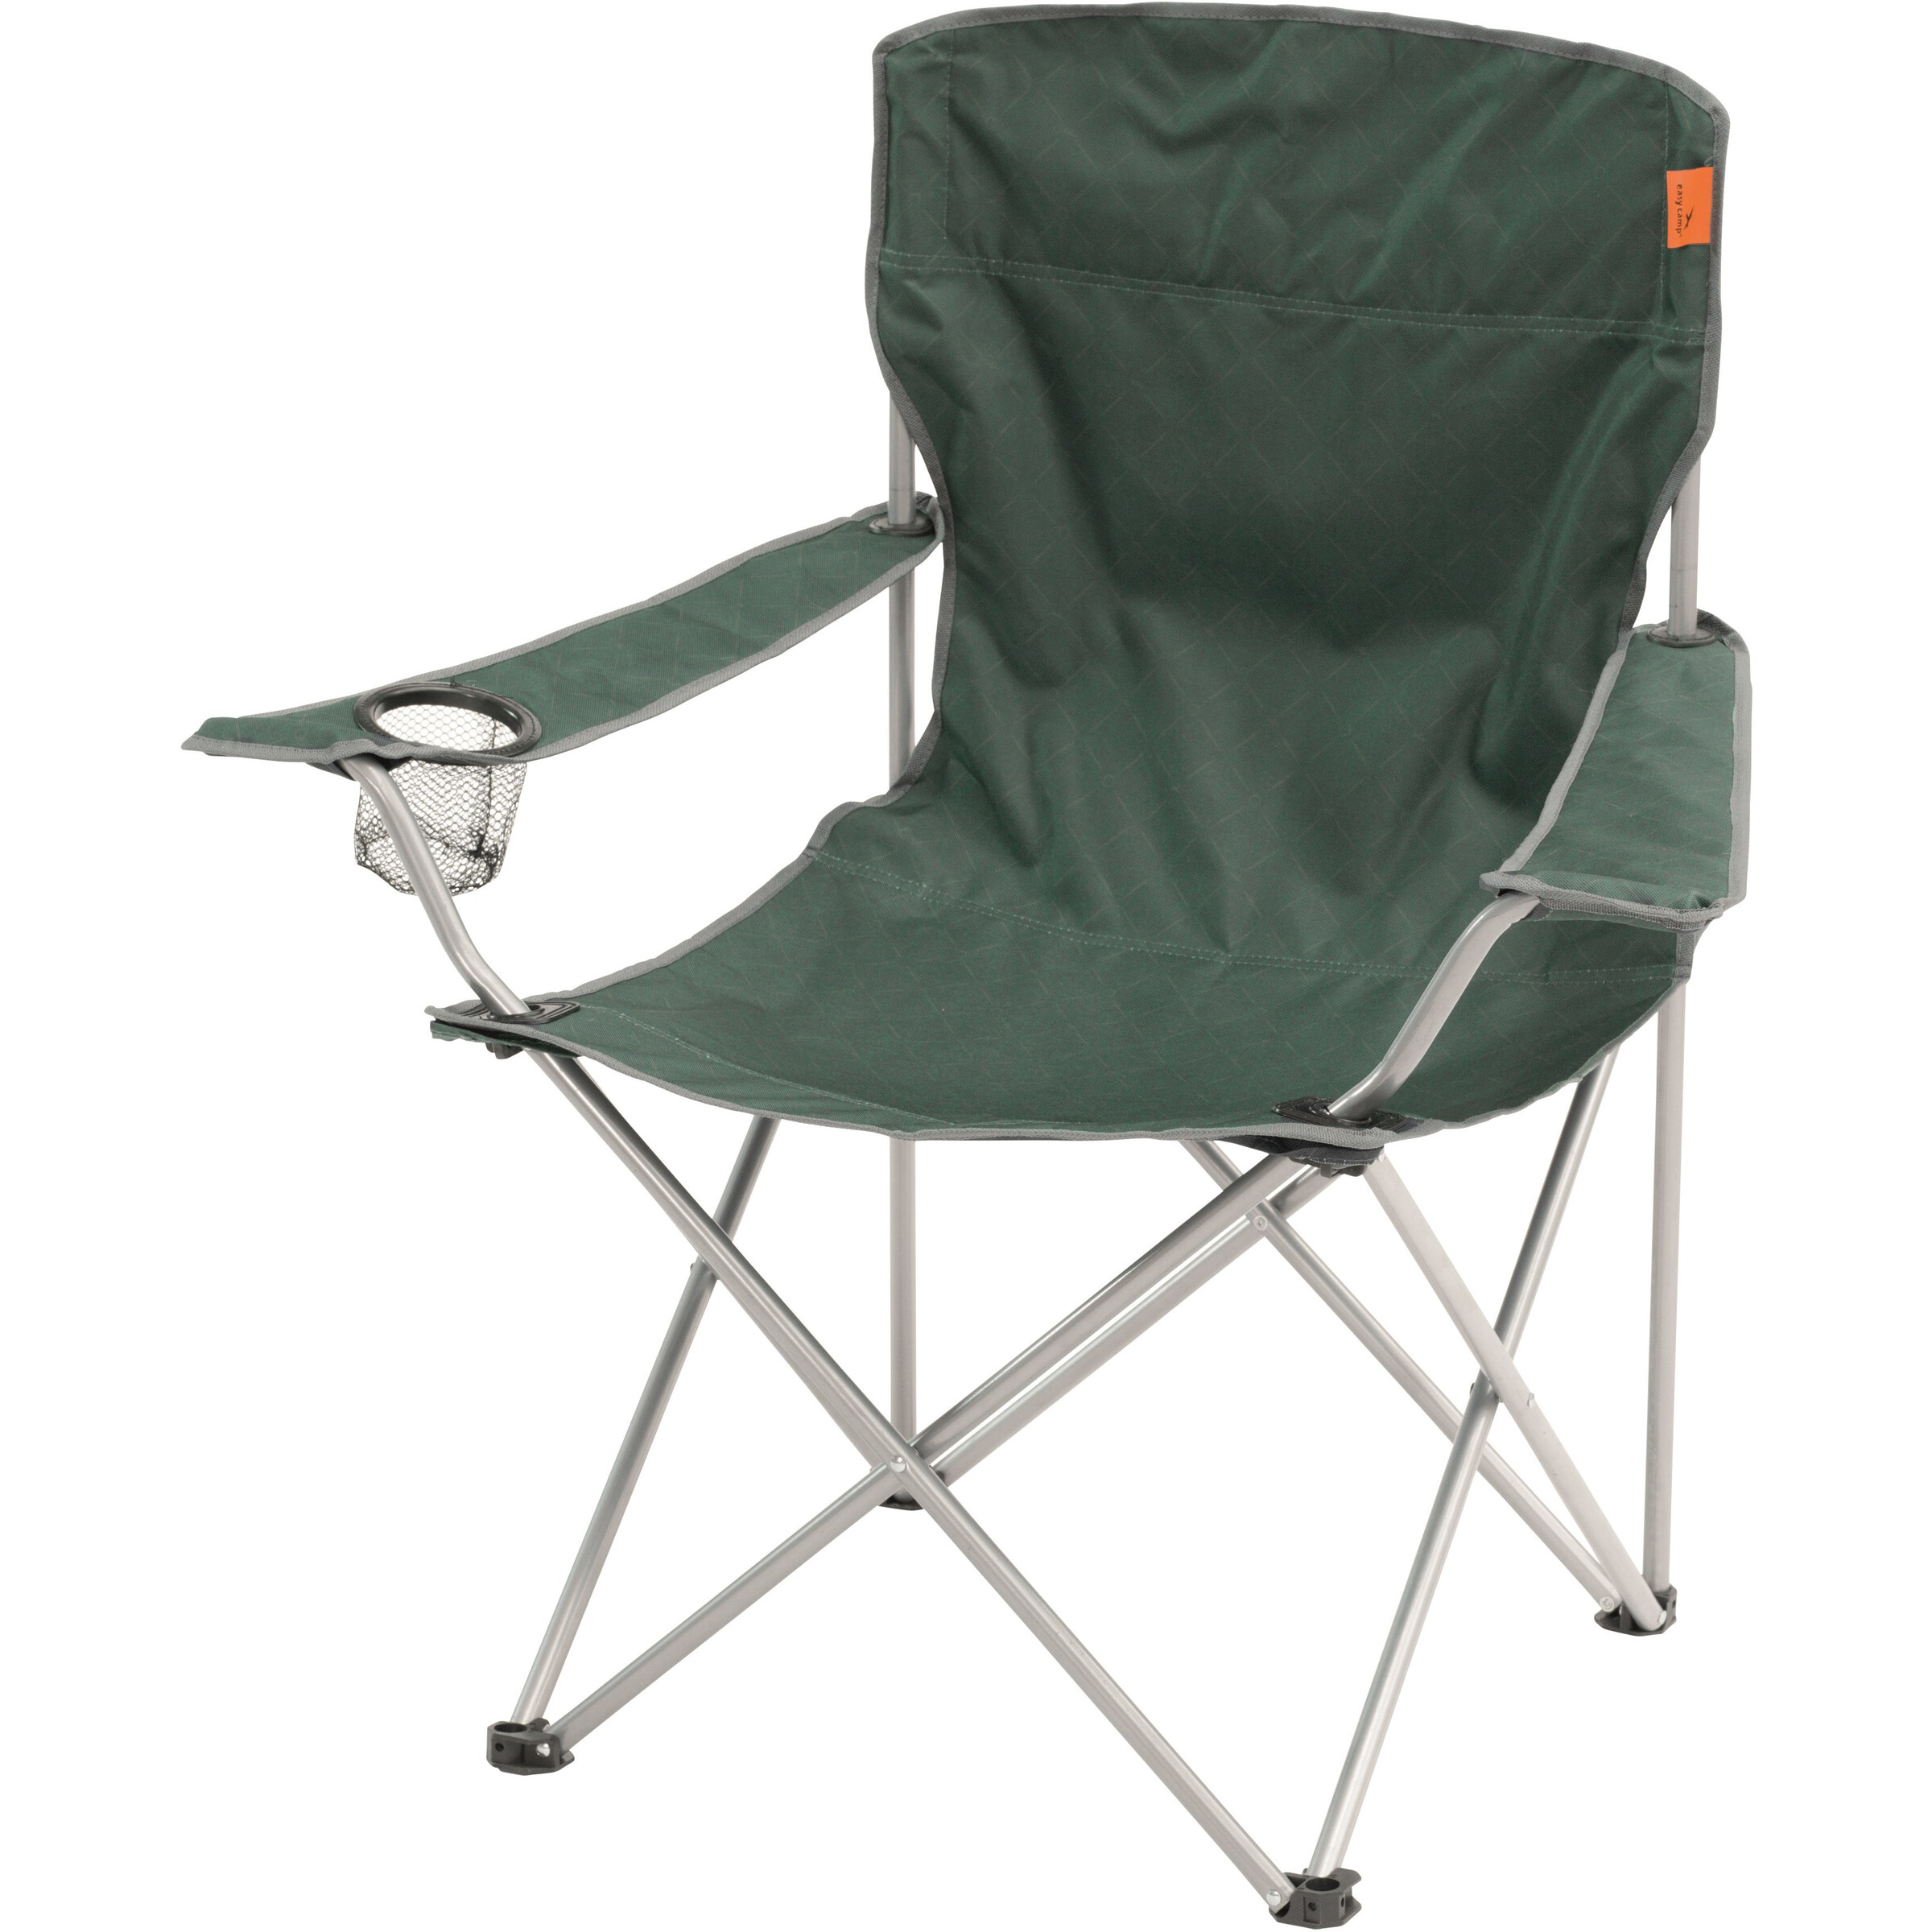 Easy Camp Boca 480058, camping chair (green) 480058 (5709388105103)